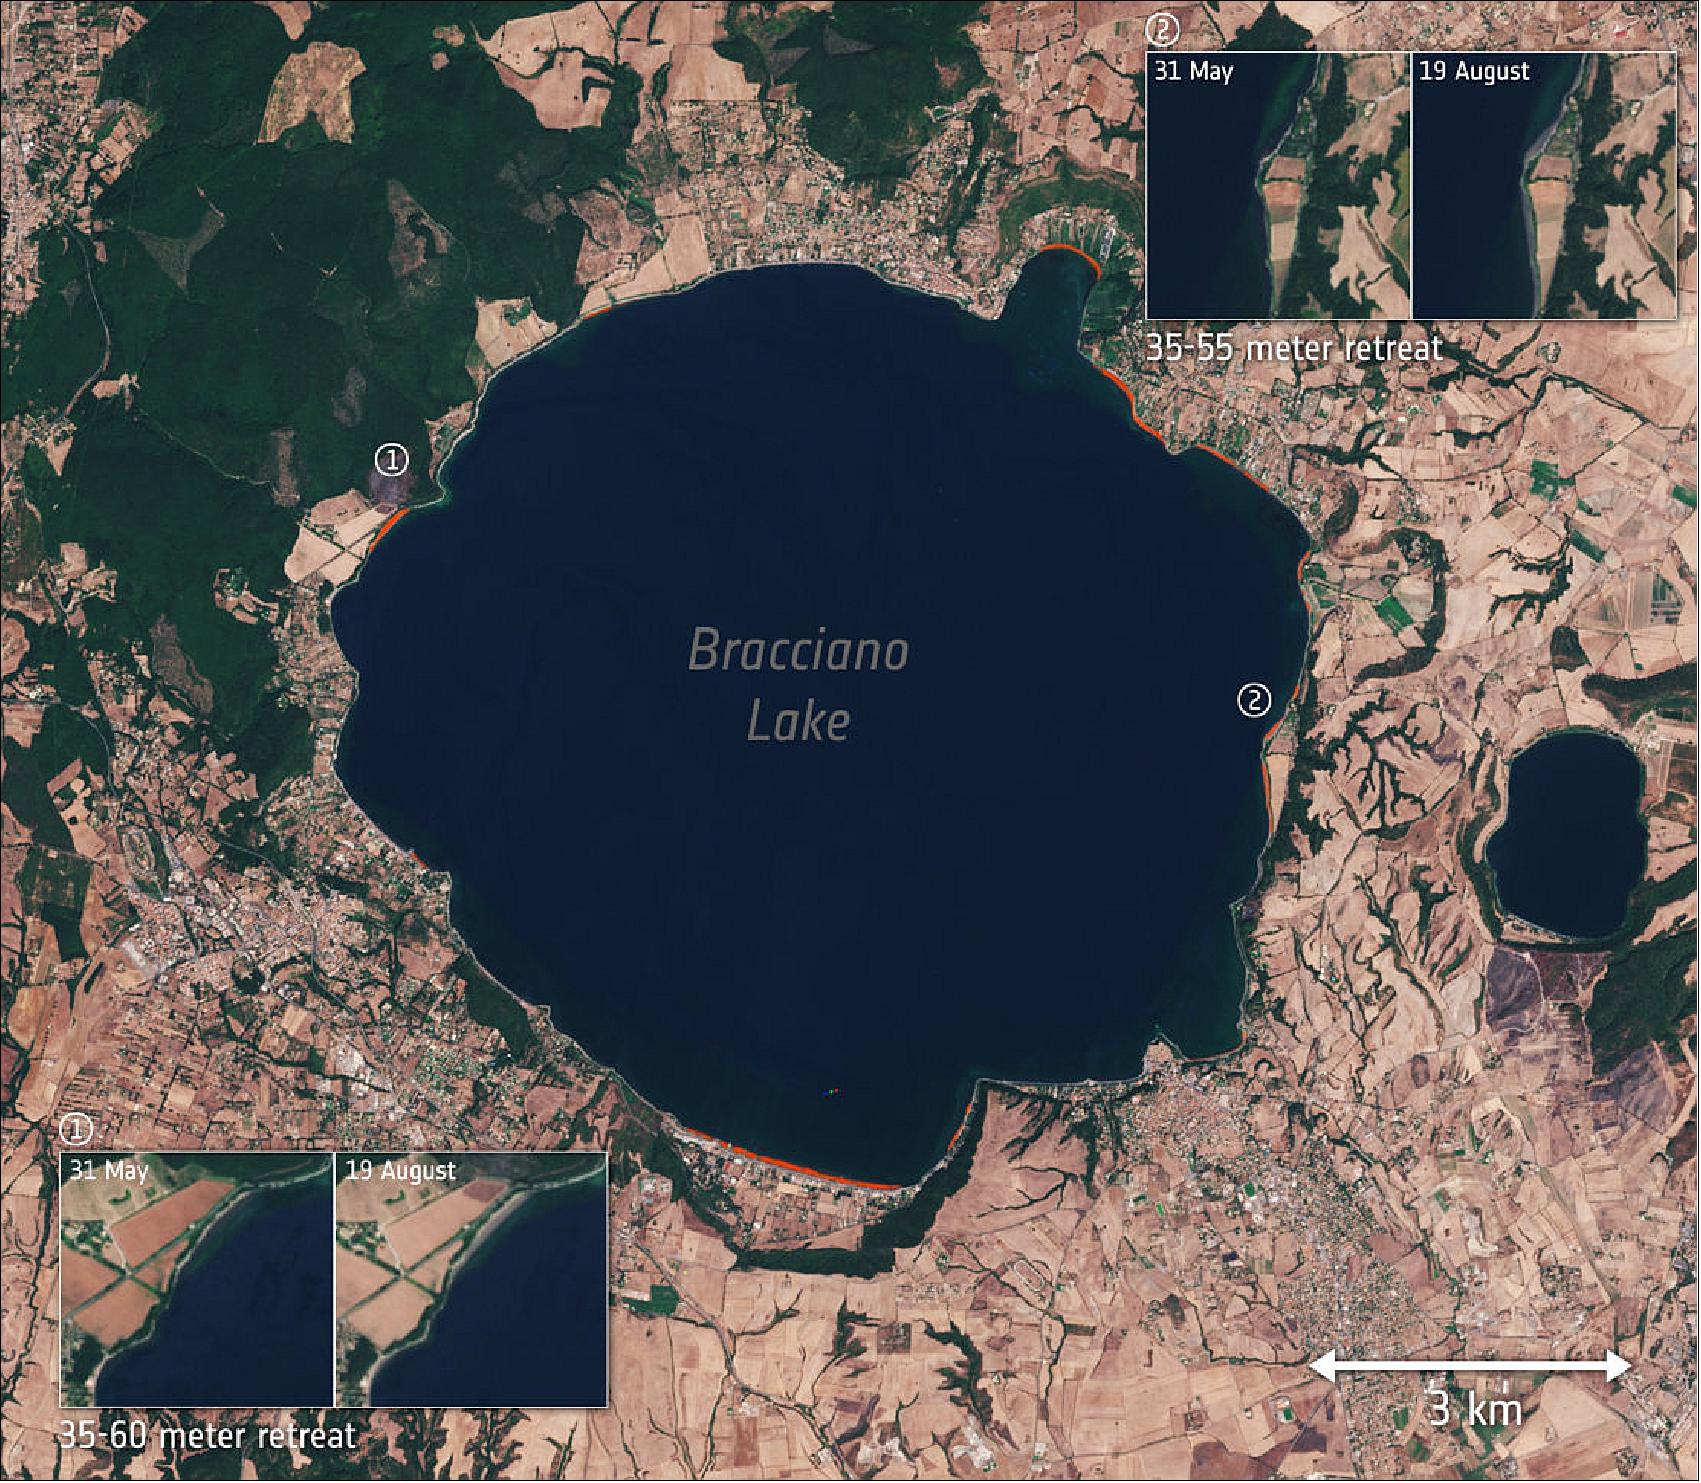 Figure 47: Parts of Italy’s Lake Bracciano shoreline receded up to 60 m during the summer of 2017, as seen by the Copernicus Sentinel-2 satellite mission (image credit: ESA, the image contains modified Copernicus Sentinel data (2017), processed by ESA, CC BY-SA 3.0 IGO)